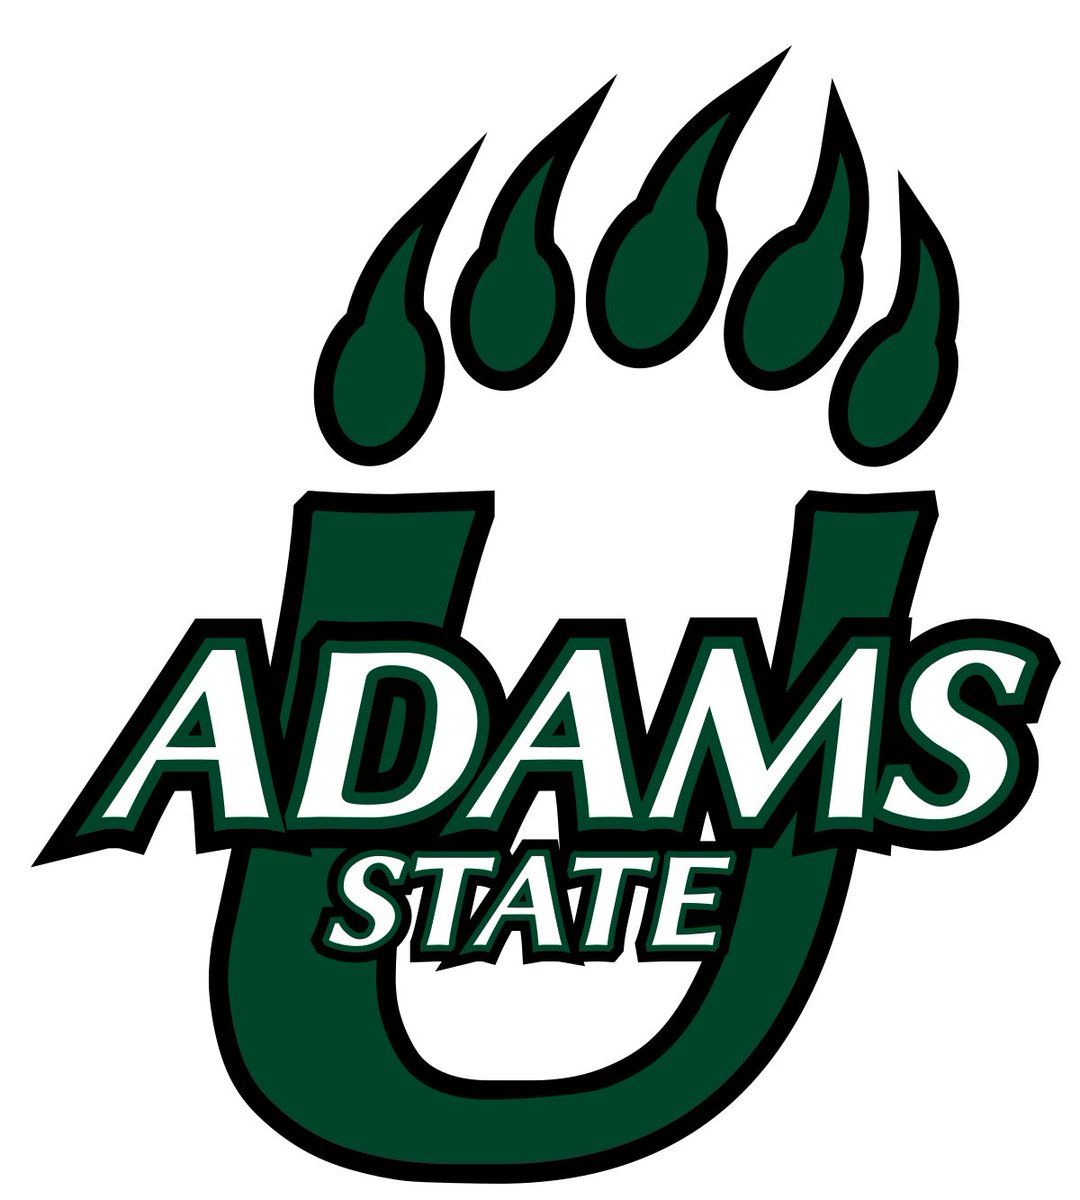 After a great conversation with Coach @KennyTripp I am excited to have received an offer to continue my academic and athletic career at Adams State University! @Miners2024